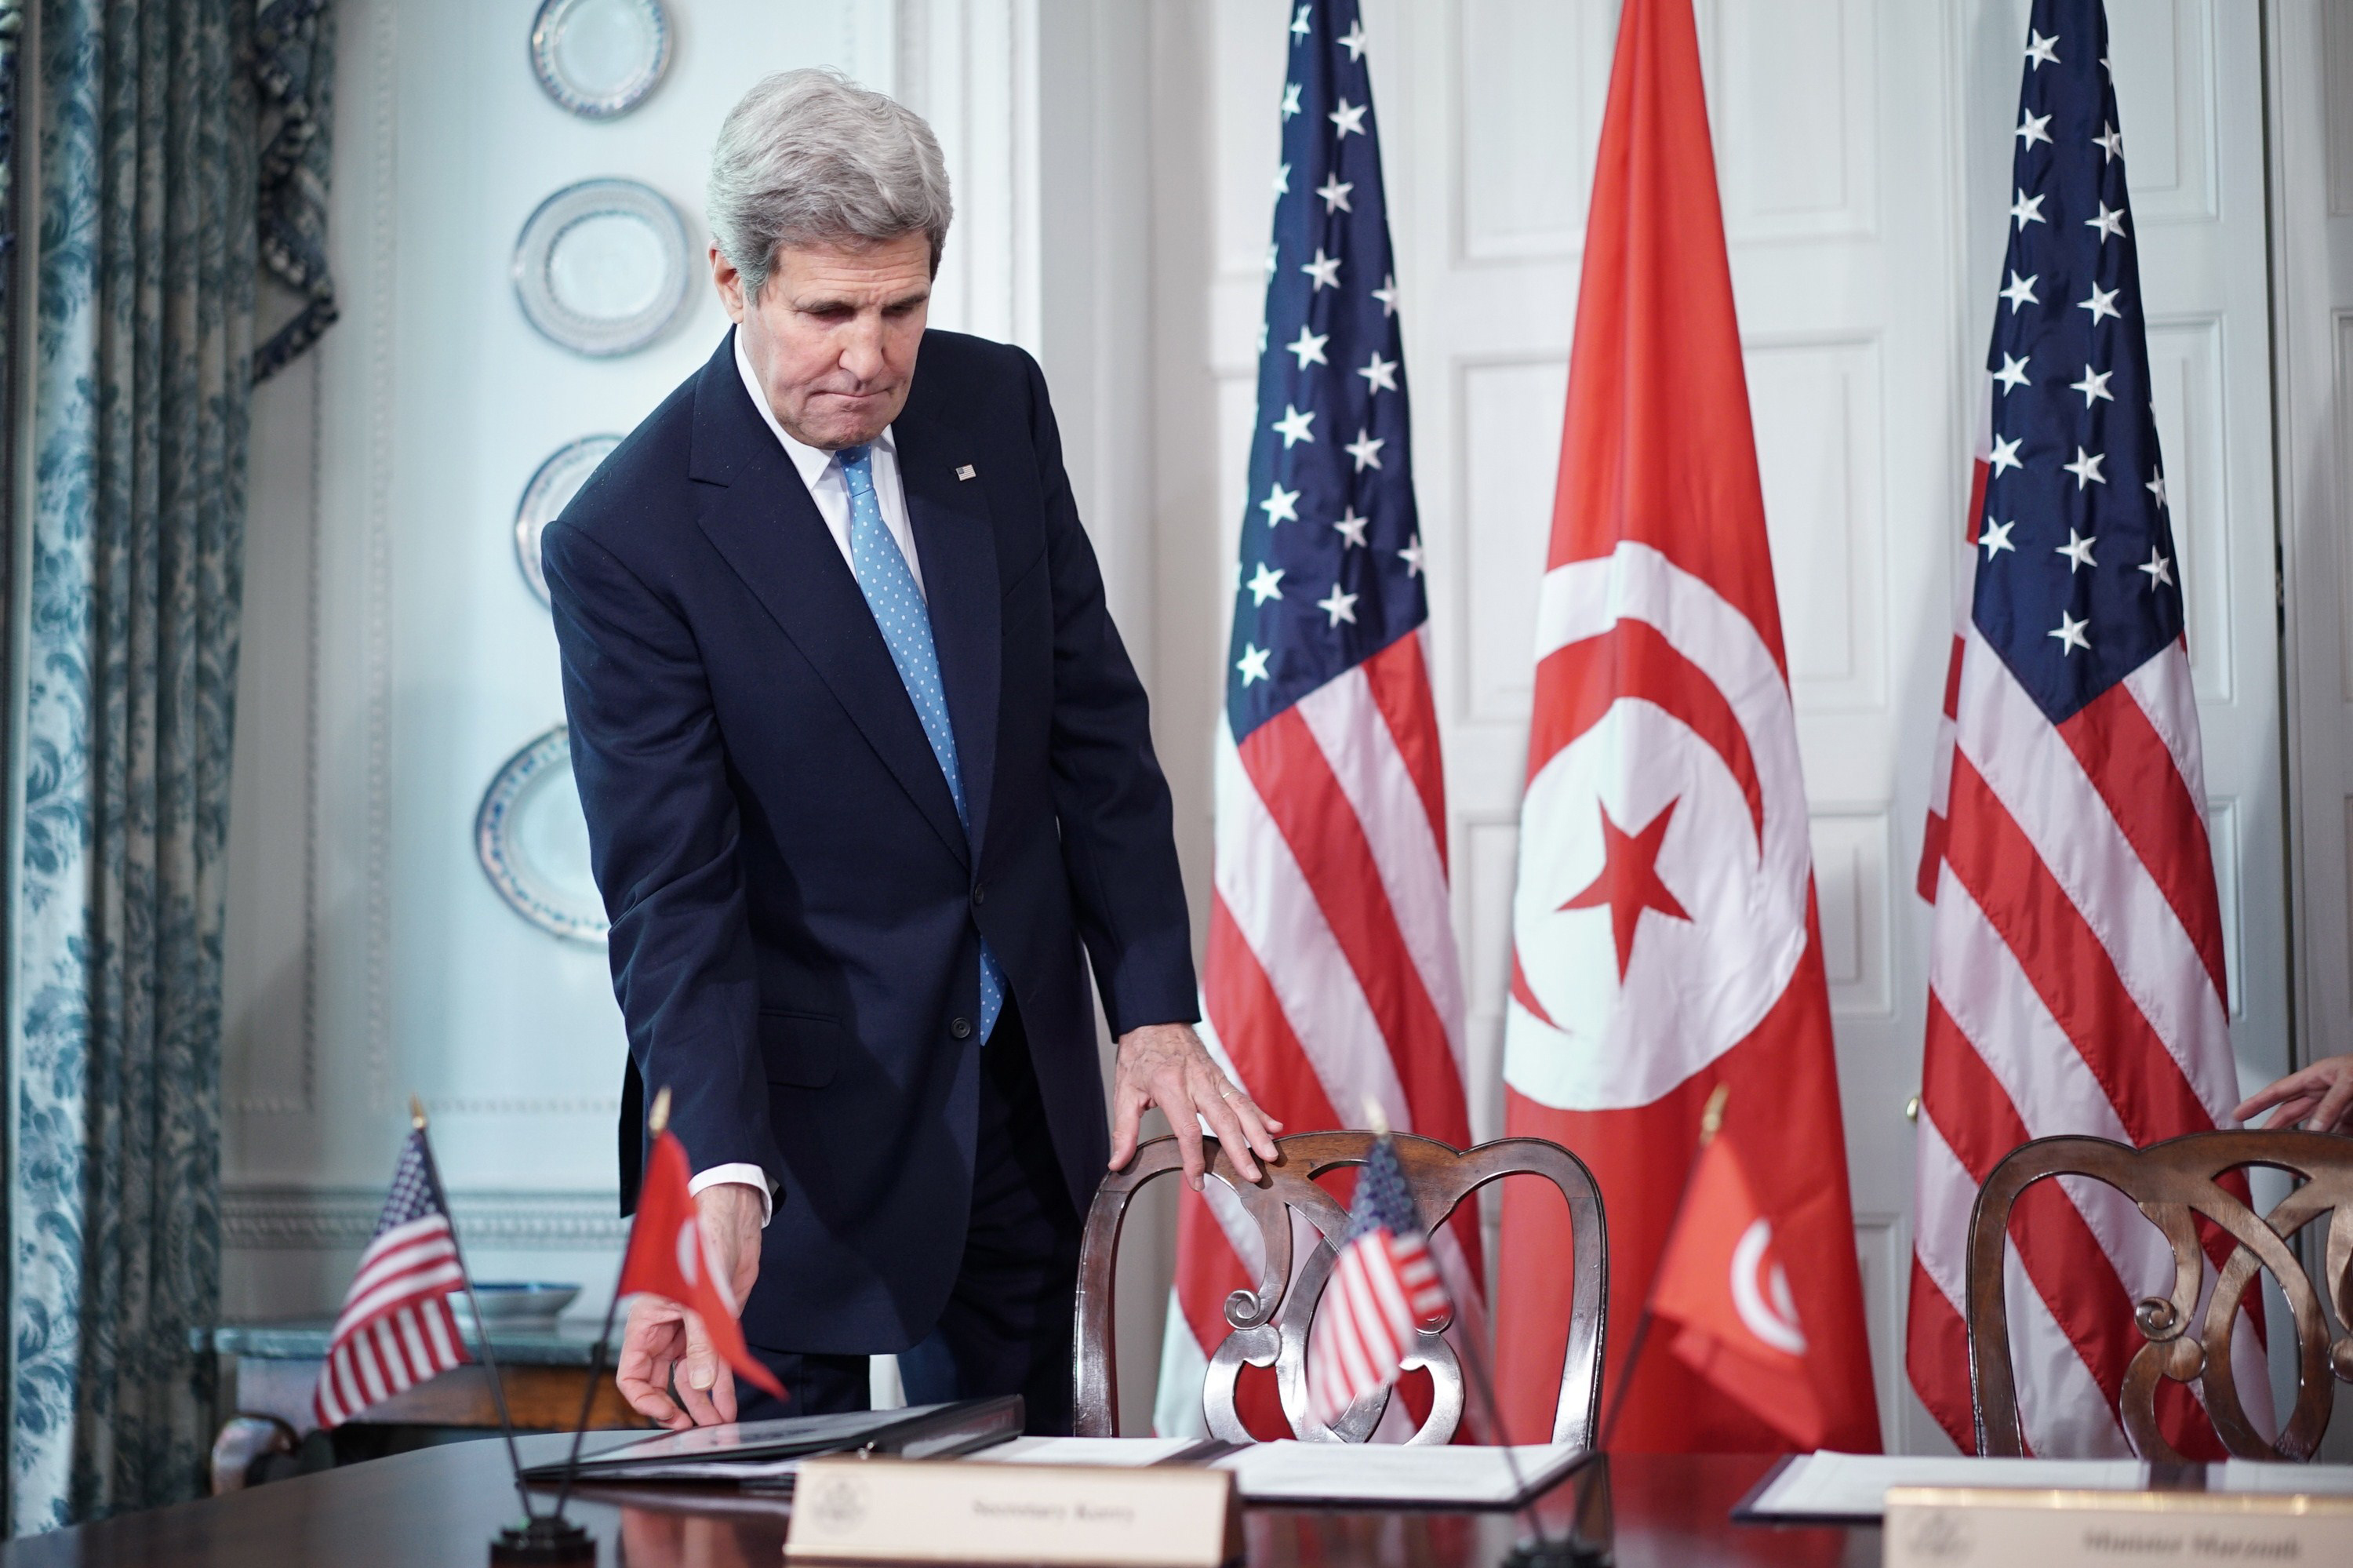 US Secretary of State John Kerry arrives for a signing ceremony for a memorandum of understanding with Tunisian Minister of Political Affairs Mohsen Marzouk at Blair House, the presidential guest house, on May 20, 2015 in Washington, DC.